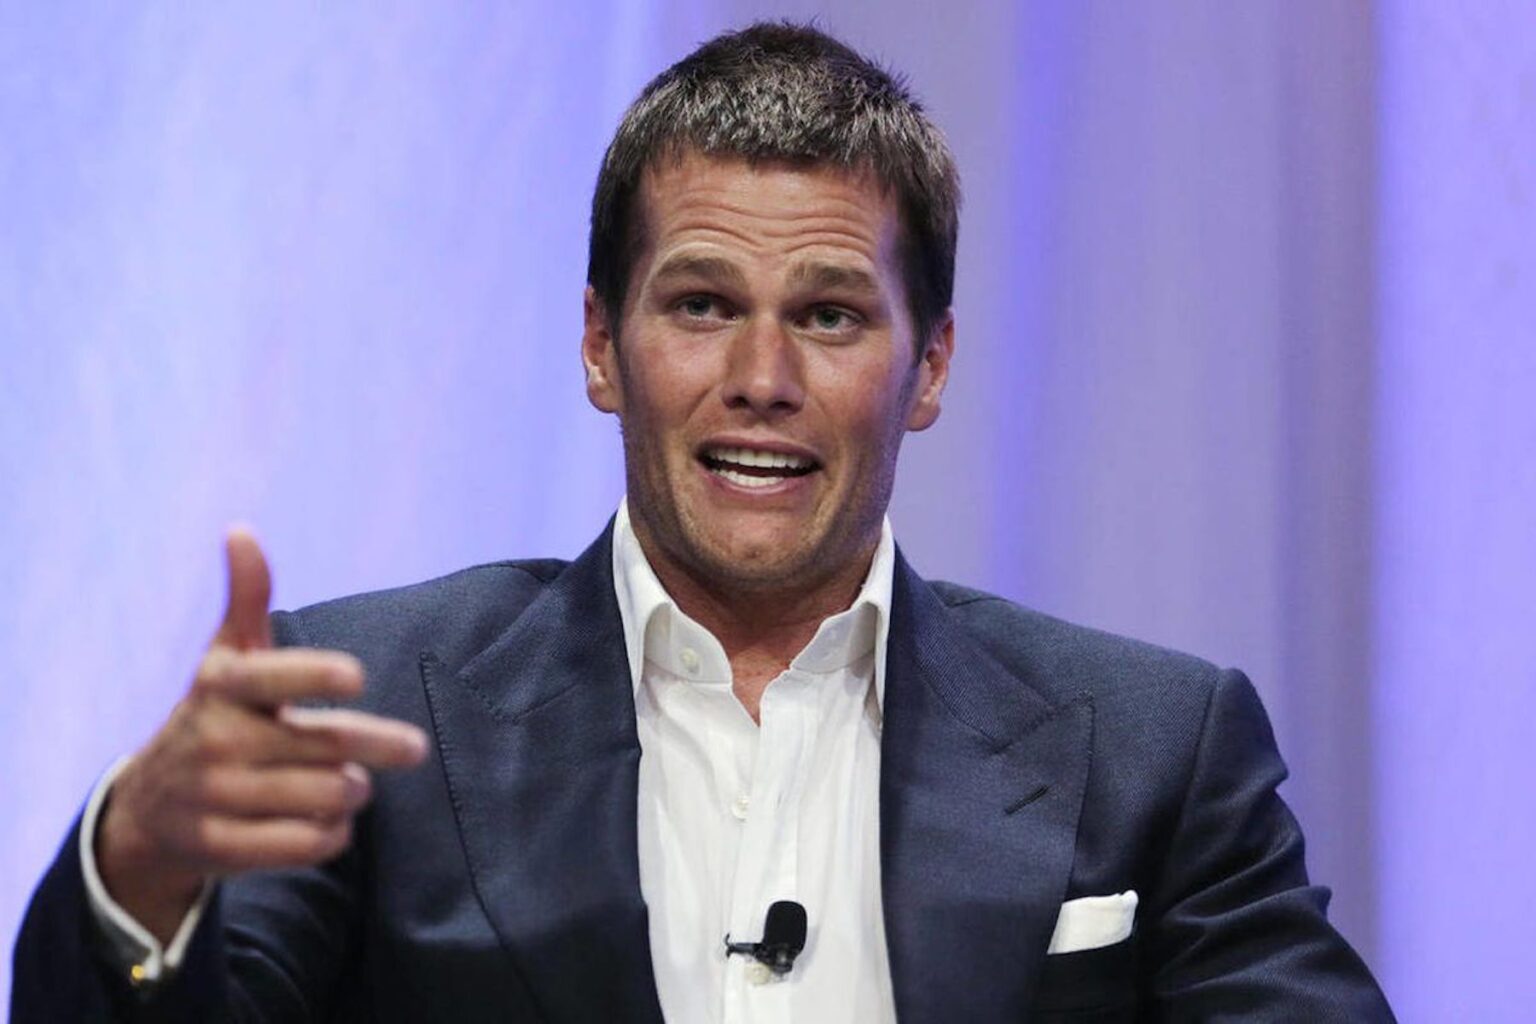 Football megastar Tom Brady establishes his own NFT company. Dive in to learn everything you need about his latest business venture.